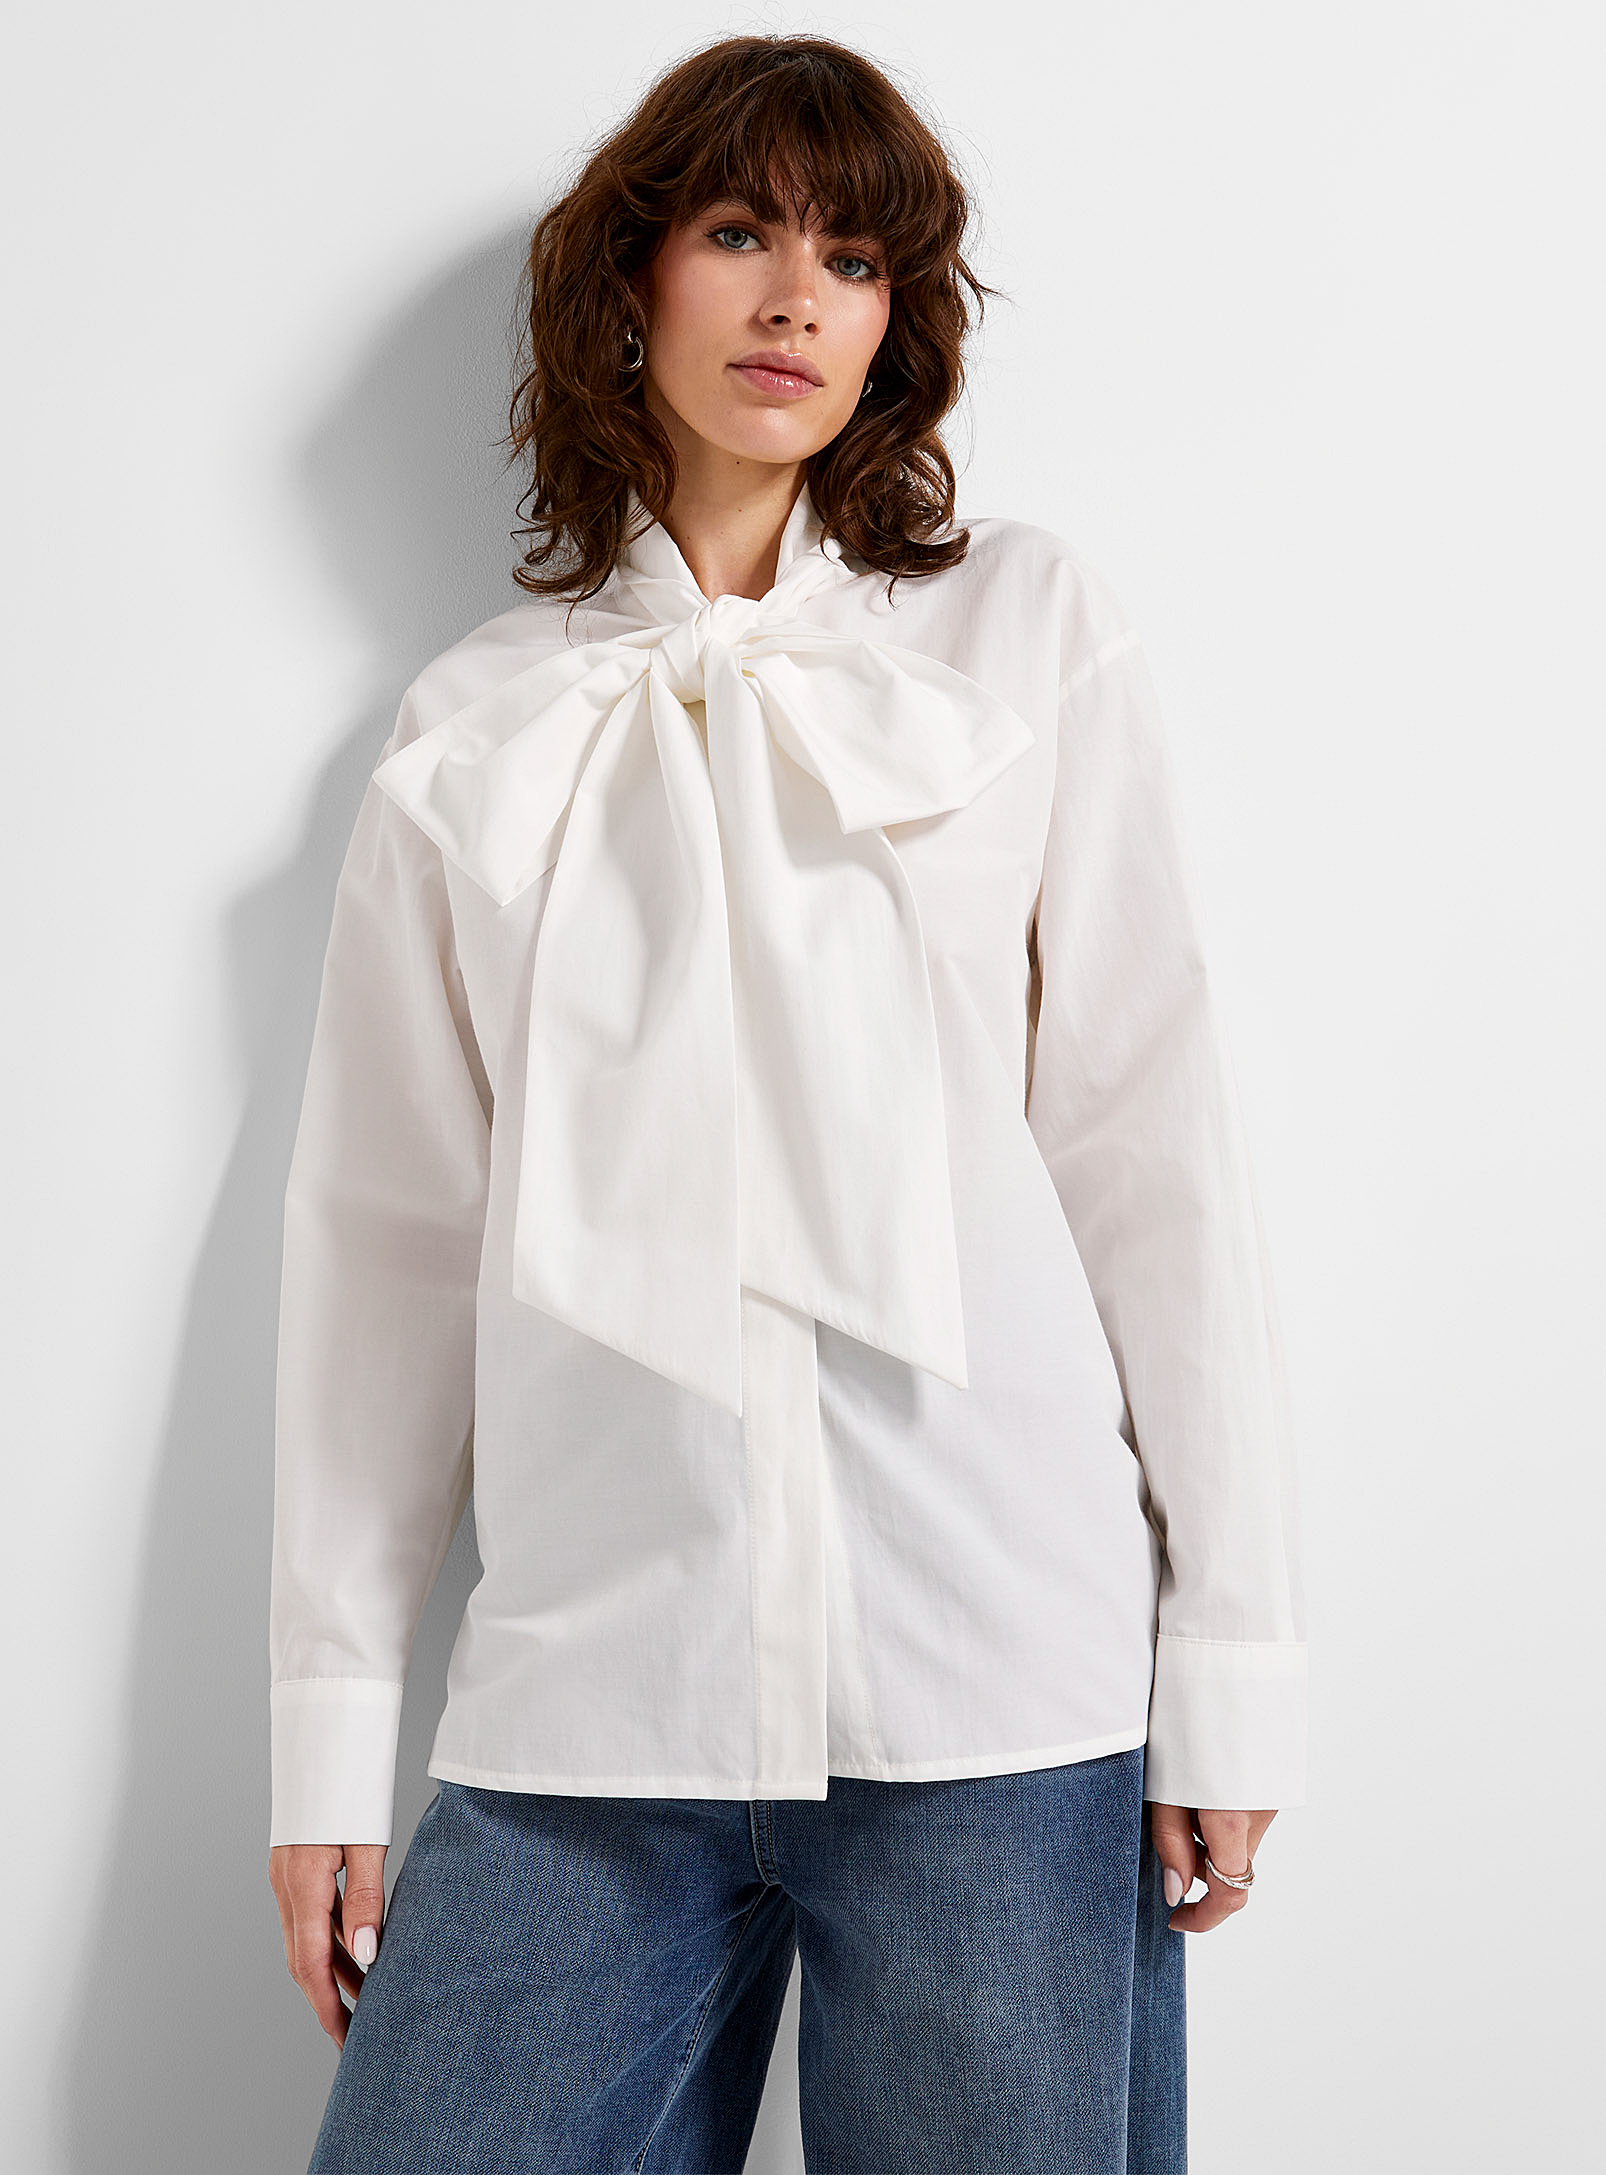 Y.A.S - Women's Tie-neck loose white shirt